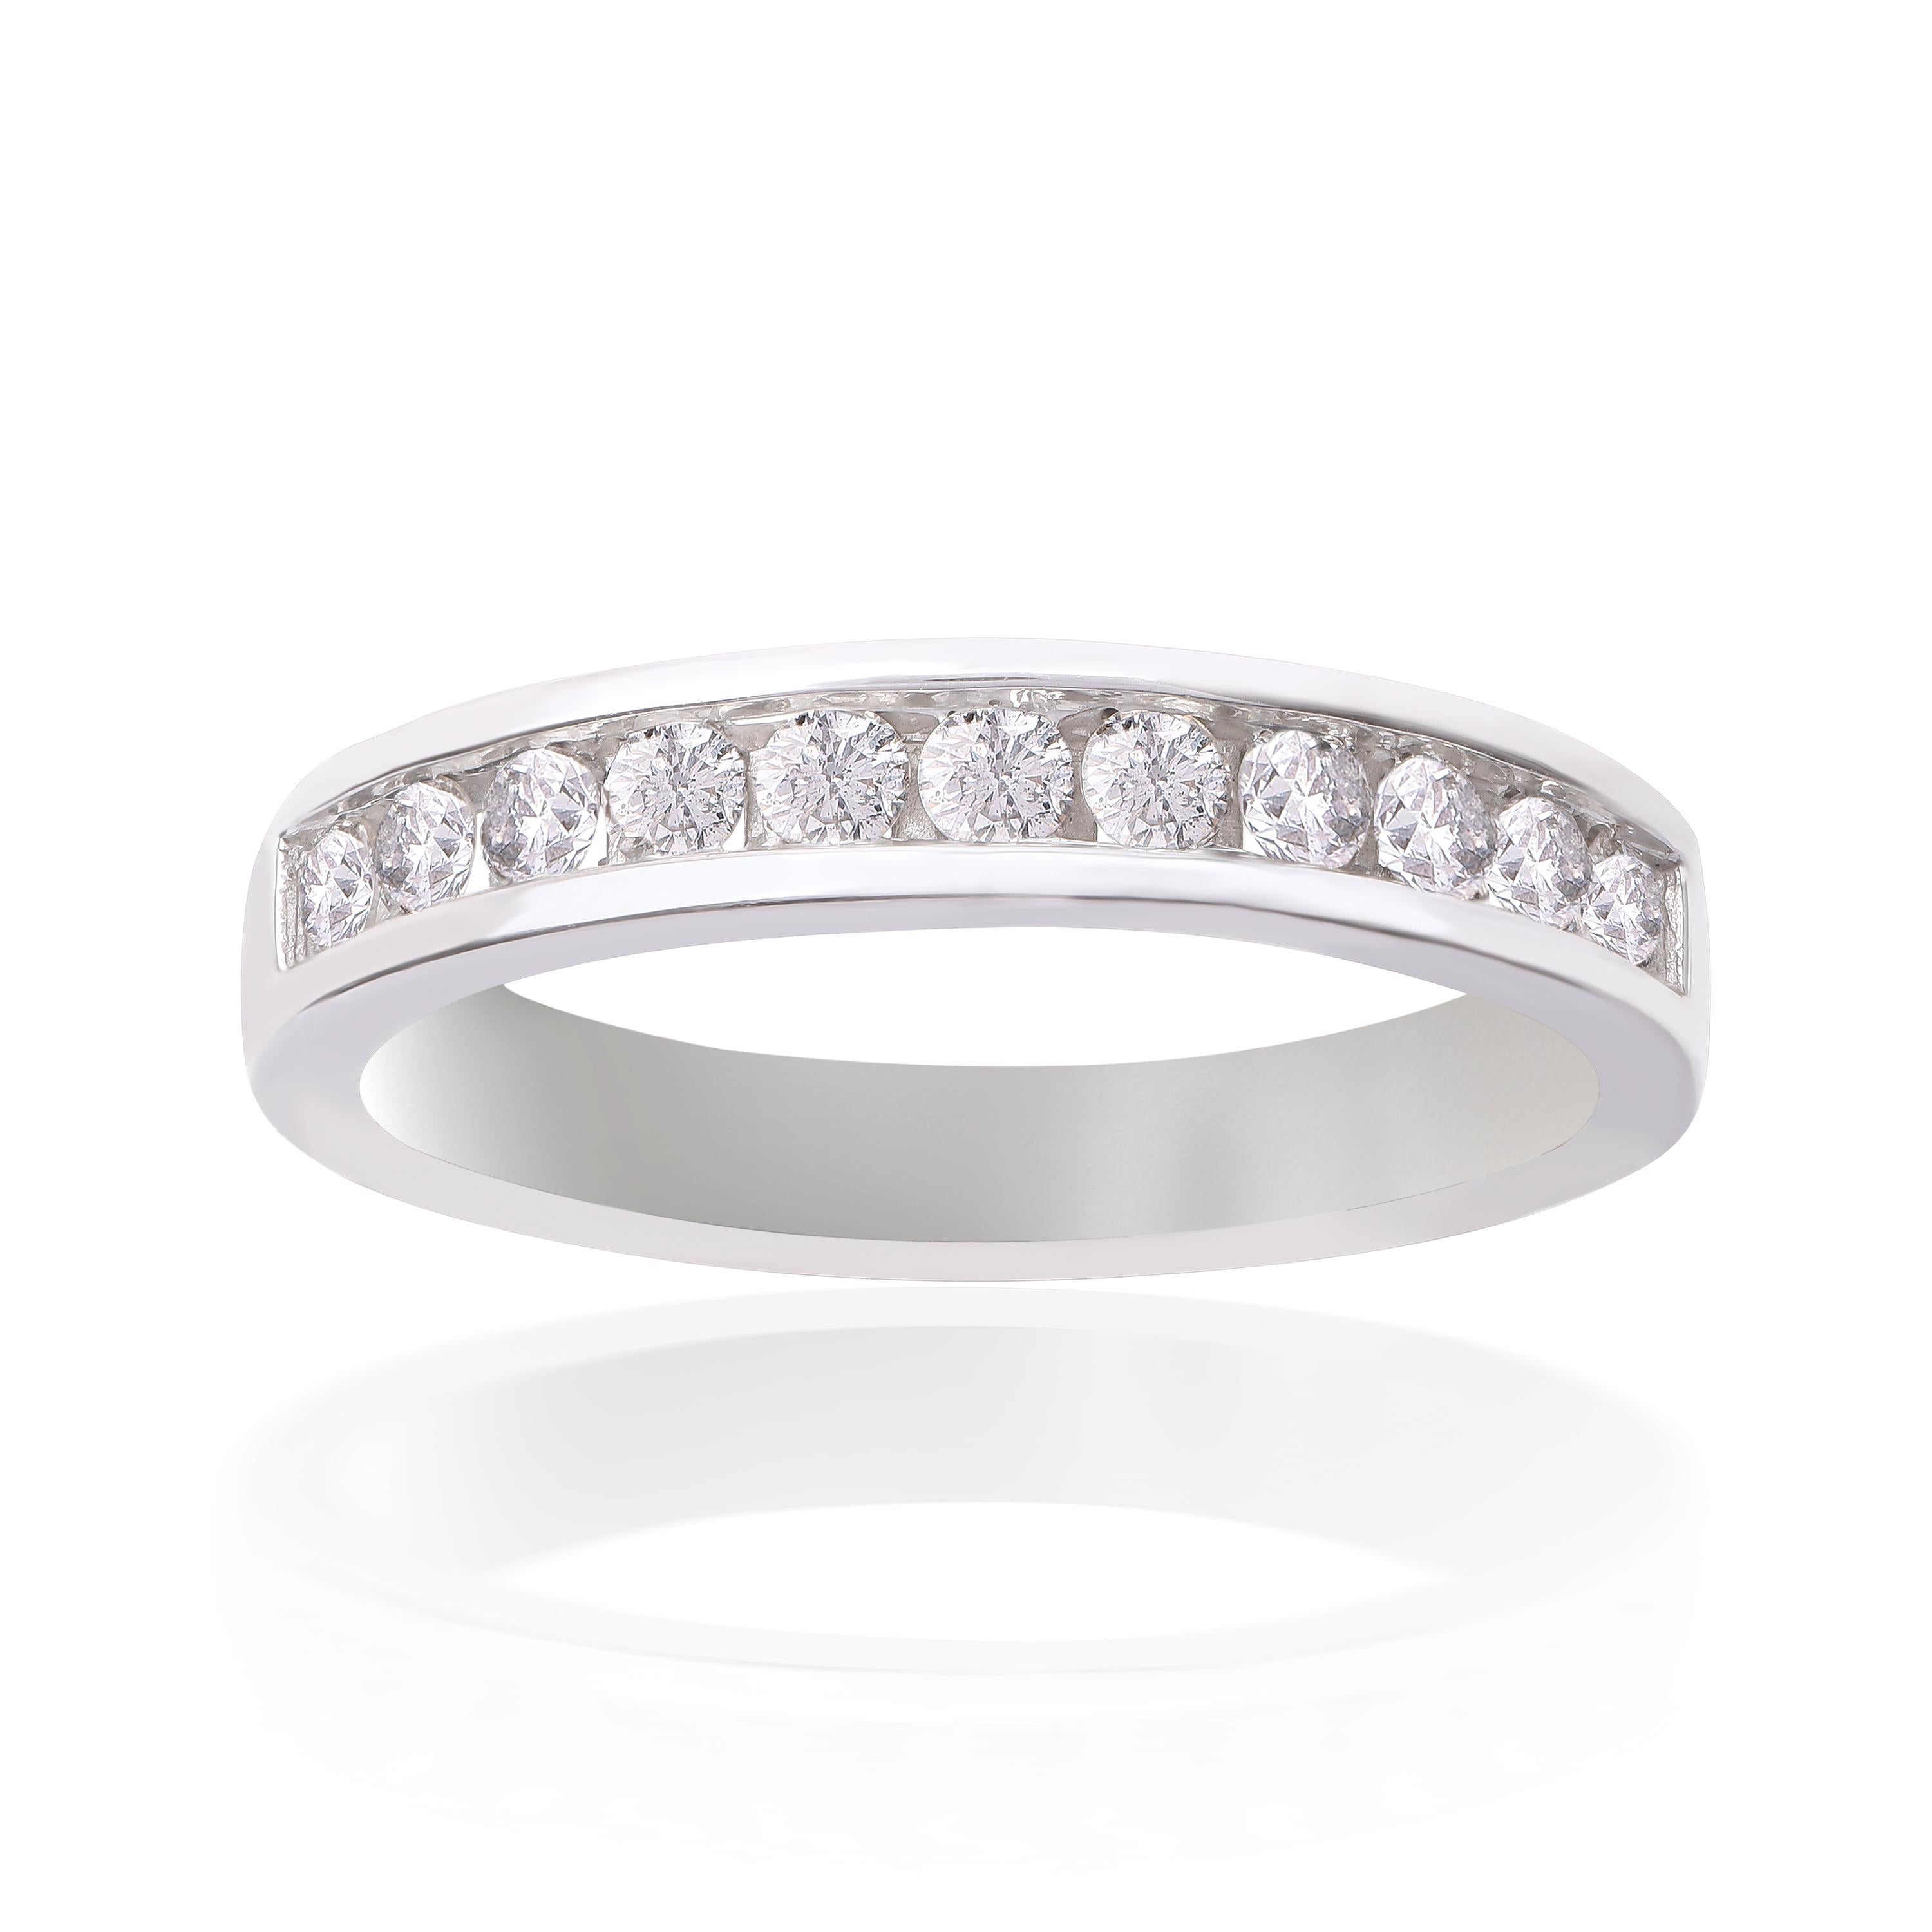 This classic diamond band is made in 18-karat white gold and studded with 11 brilliant cut diamonds beautifully in channel setting. Diamonds are graded H-I Color, I2 Clarity.